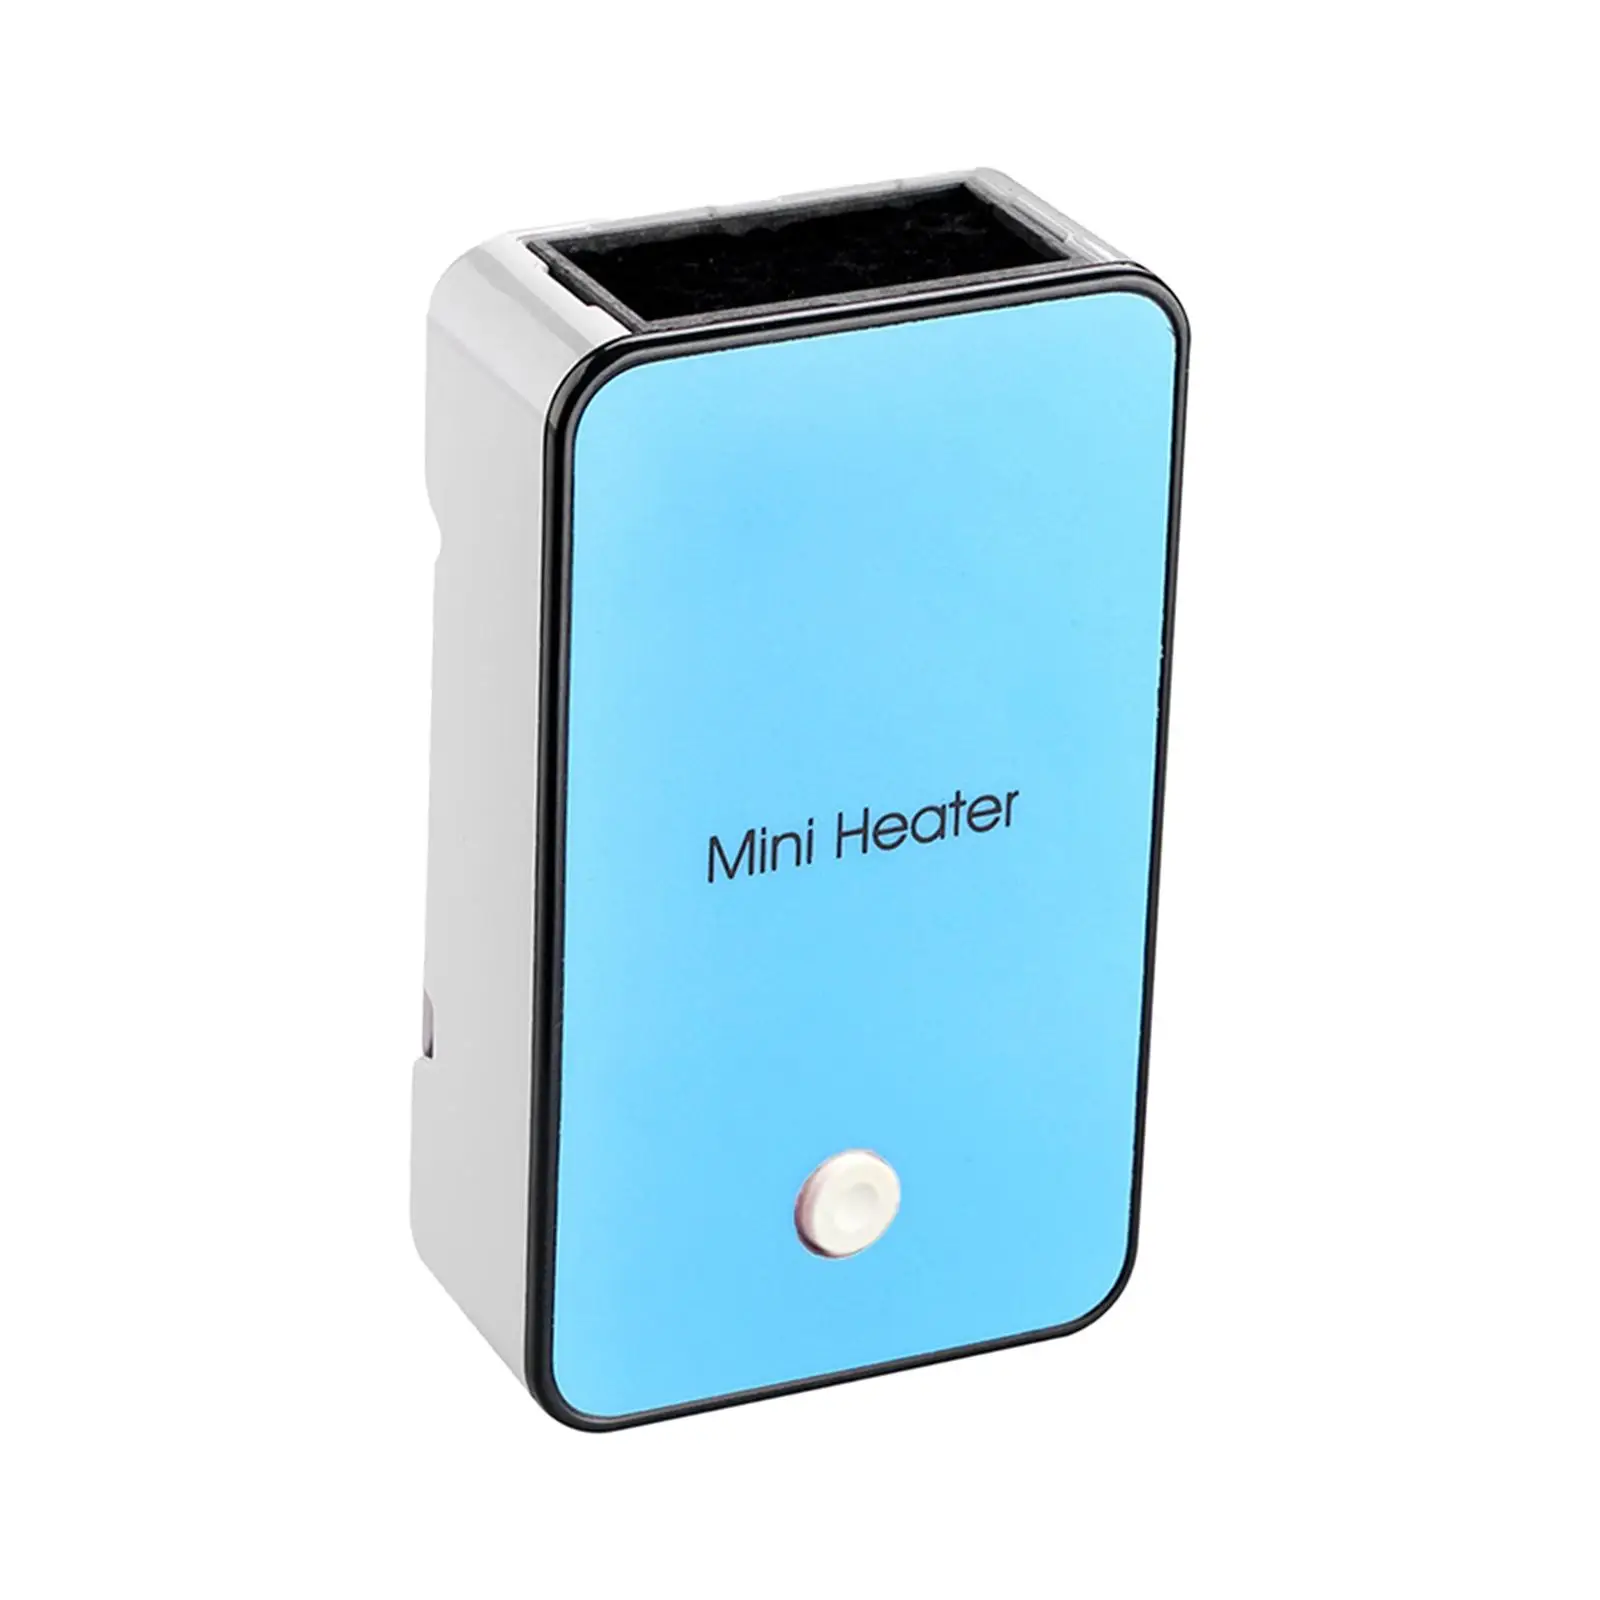 Electric Mini Heater Gifts Heating Tool for Desktop Traveling Living Room